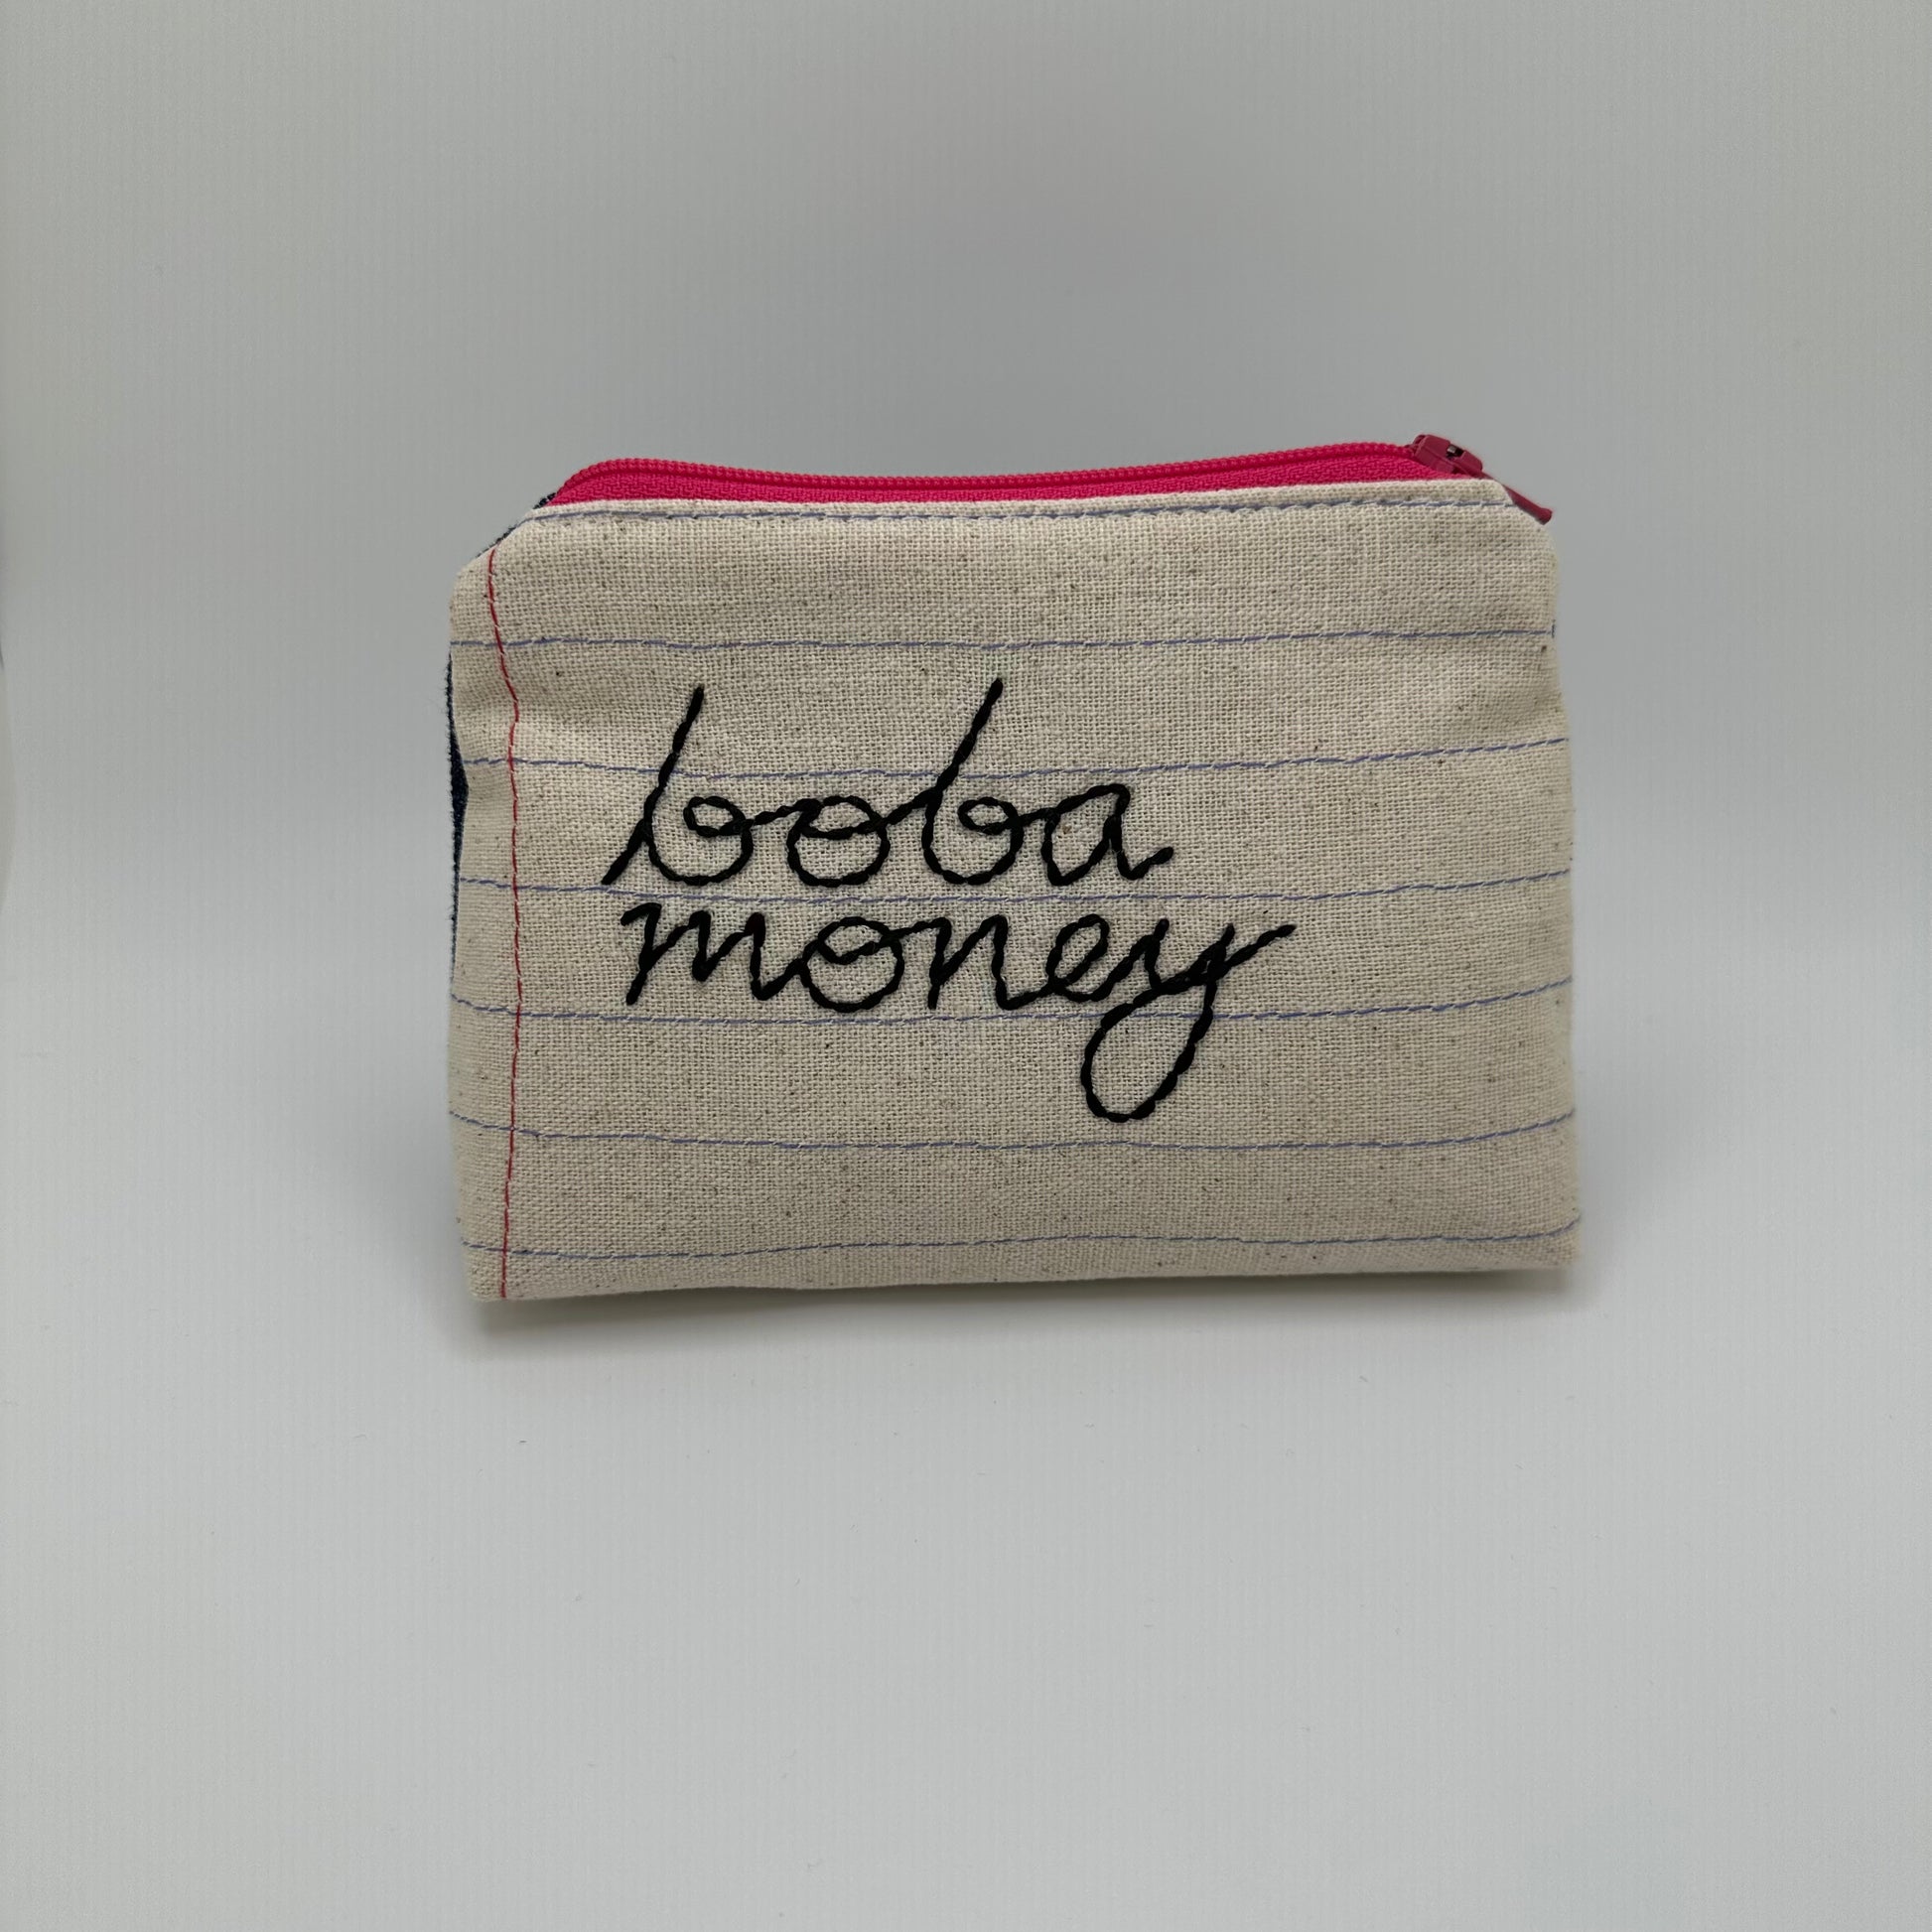 Handmade pouch sewn with the words "boba money"